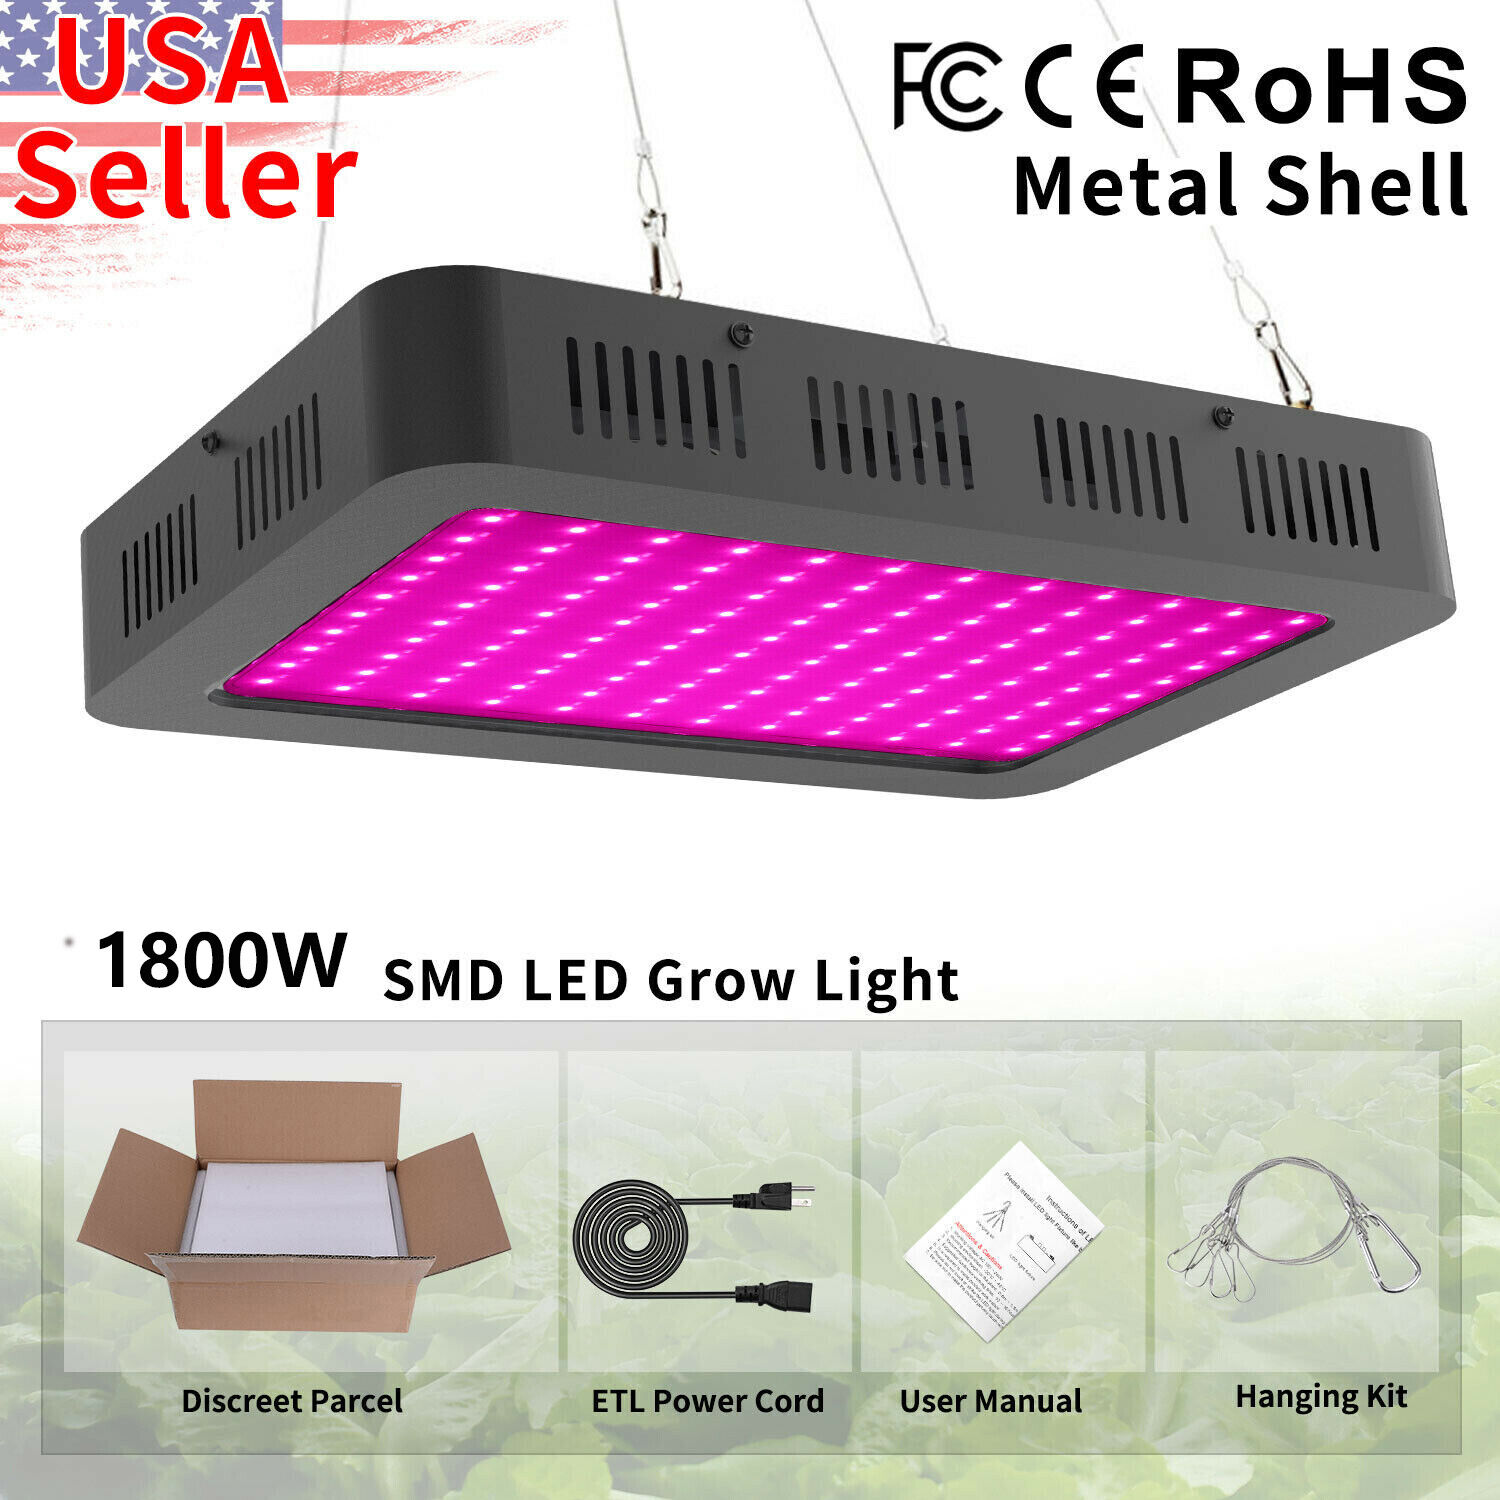 1800W LED Grow Lights for Hydroponic Indoor Plants Veg Flower Replace HPS HID